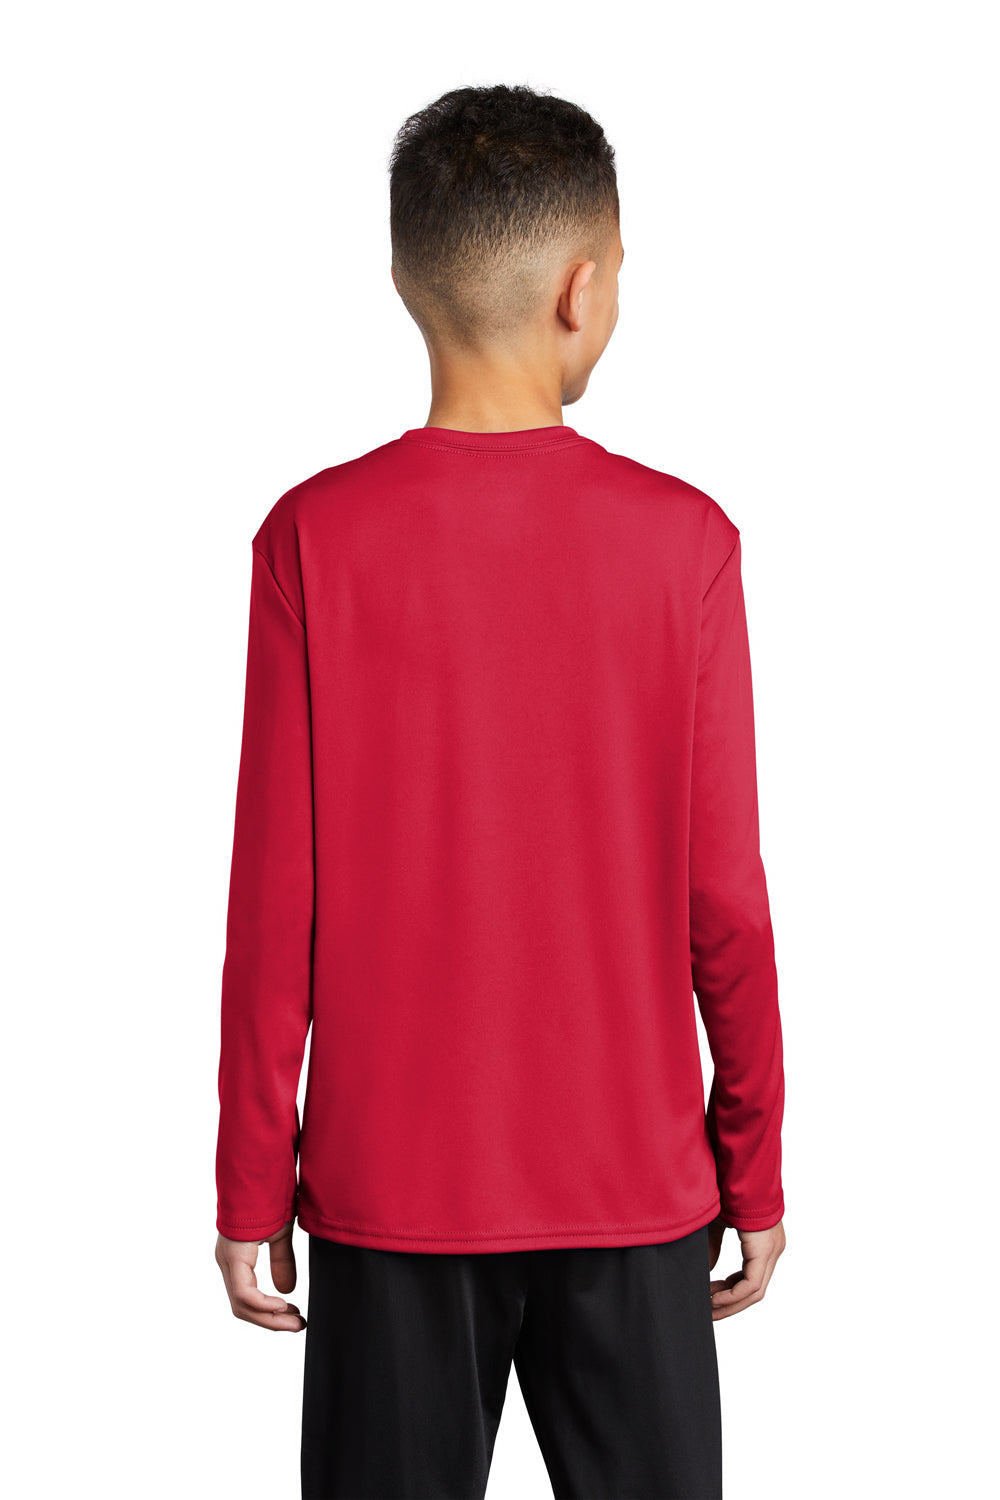 Port & Company Youth Performance Long Sleeve Crewneck T-Shirt Red Side